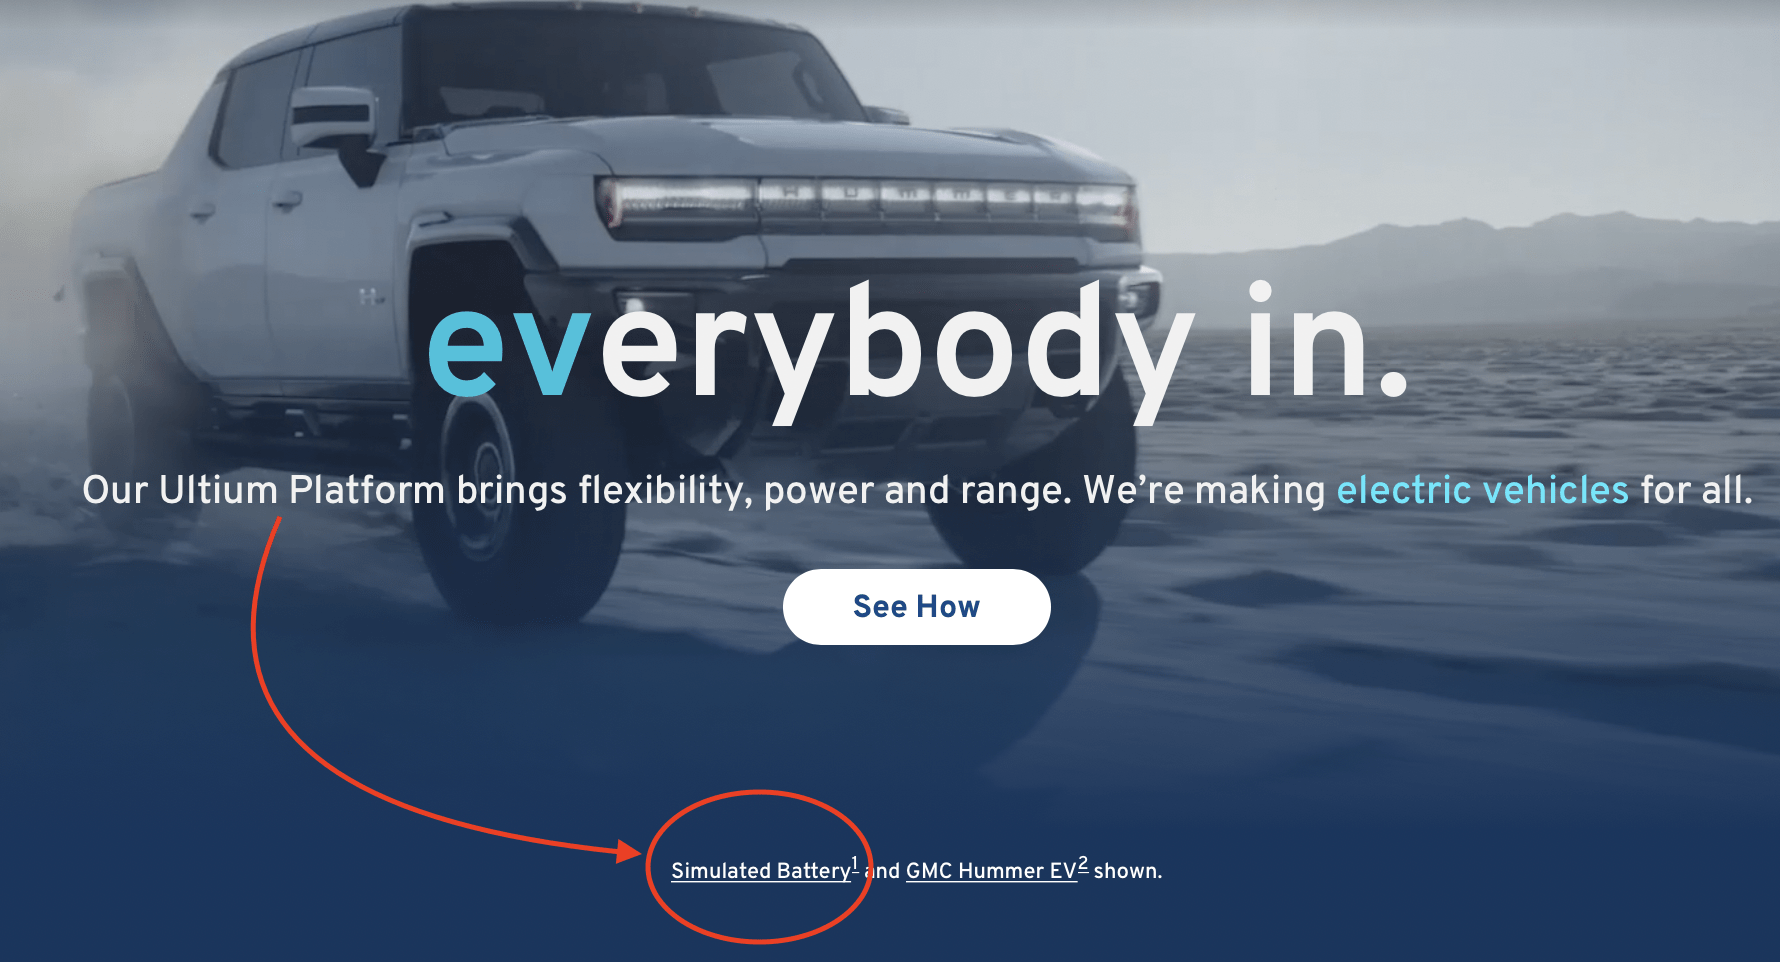 GM's "Everybody In" Campaign